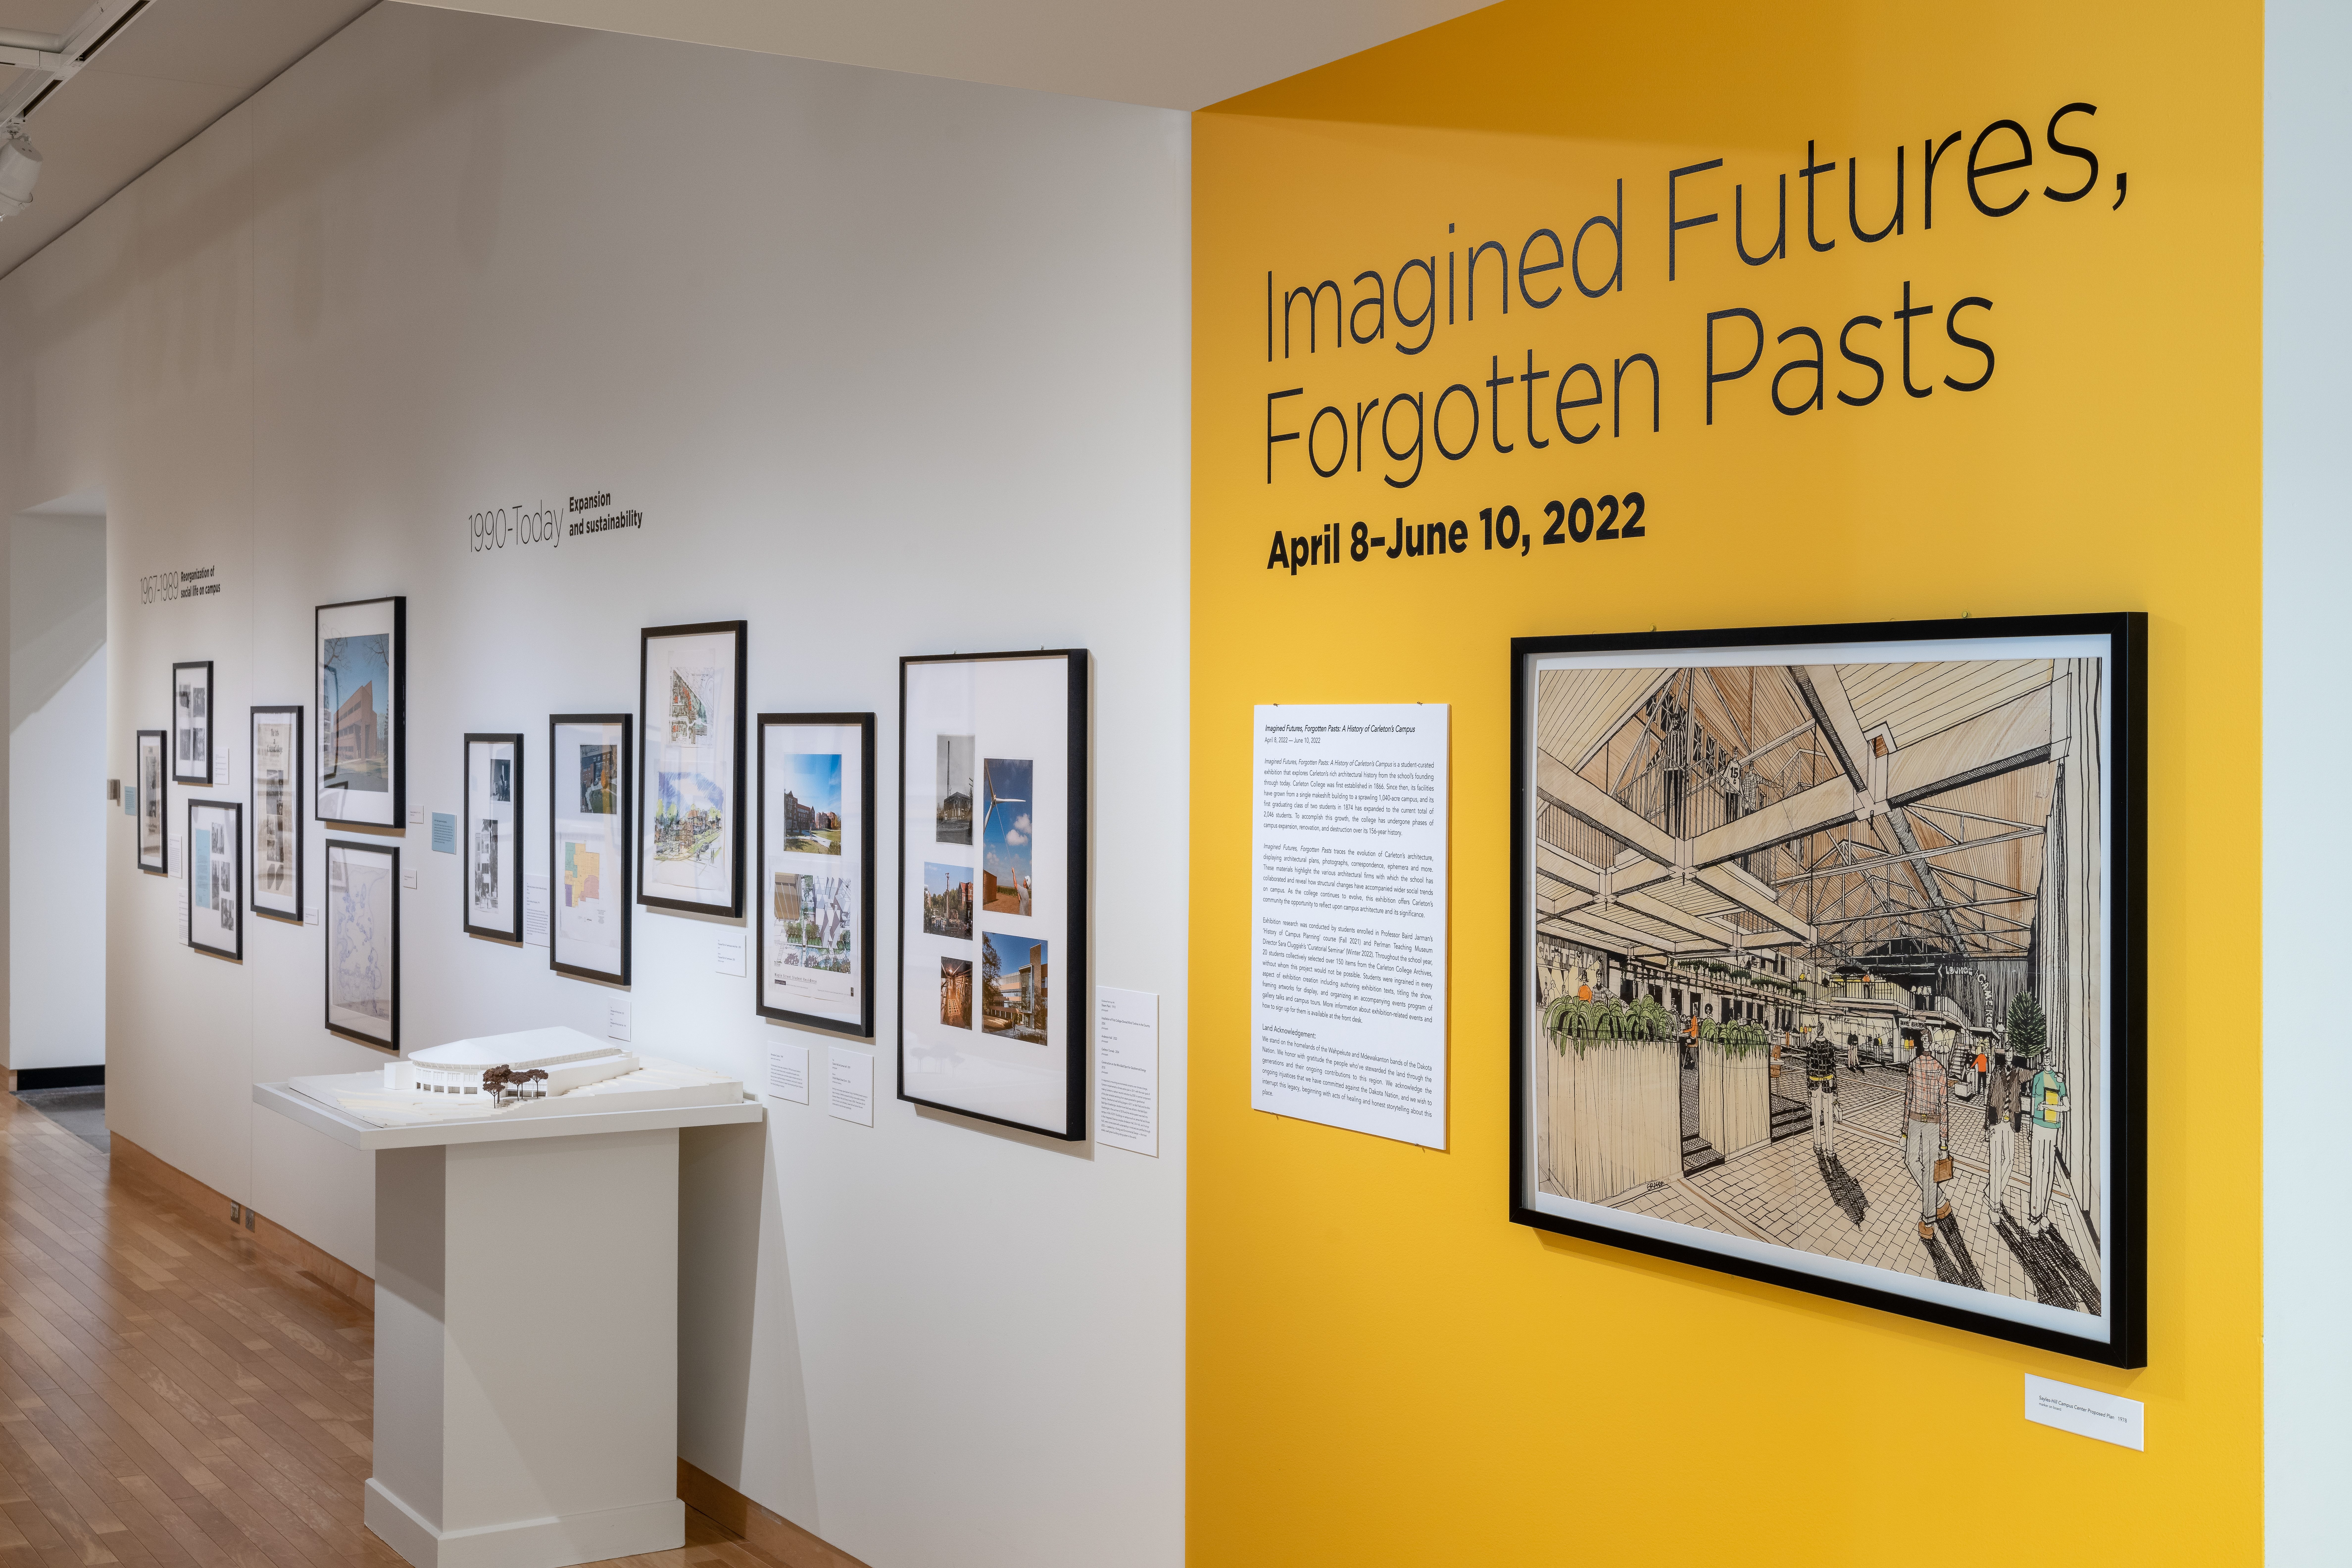 “Imagined Futures, Forgotten Pasts” painted in black text on a yellow wall above a large drawing of the Sayles-Hill Campus Center remodel and next to smaller framed photographs on a white wall